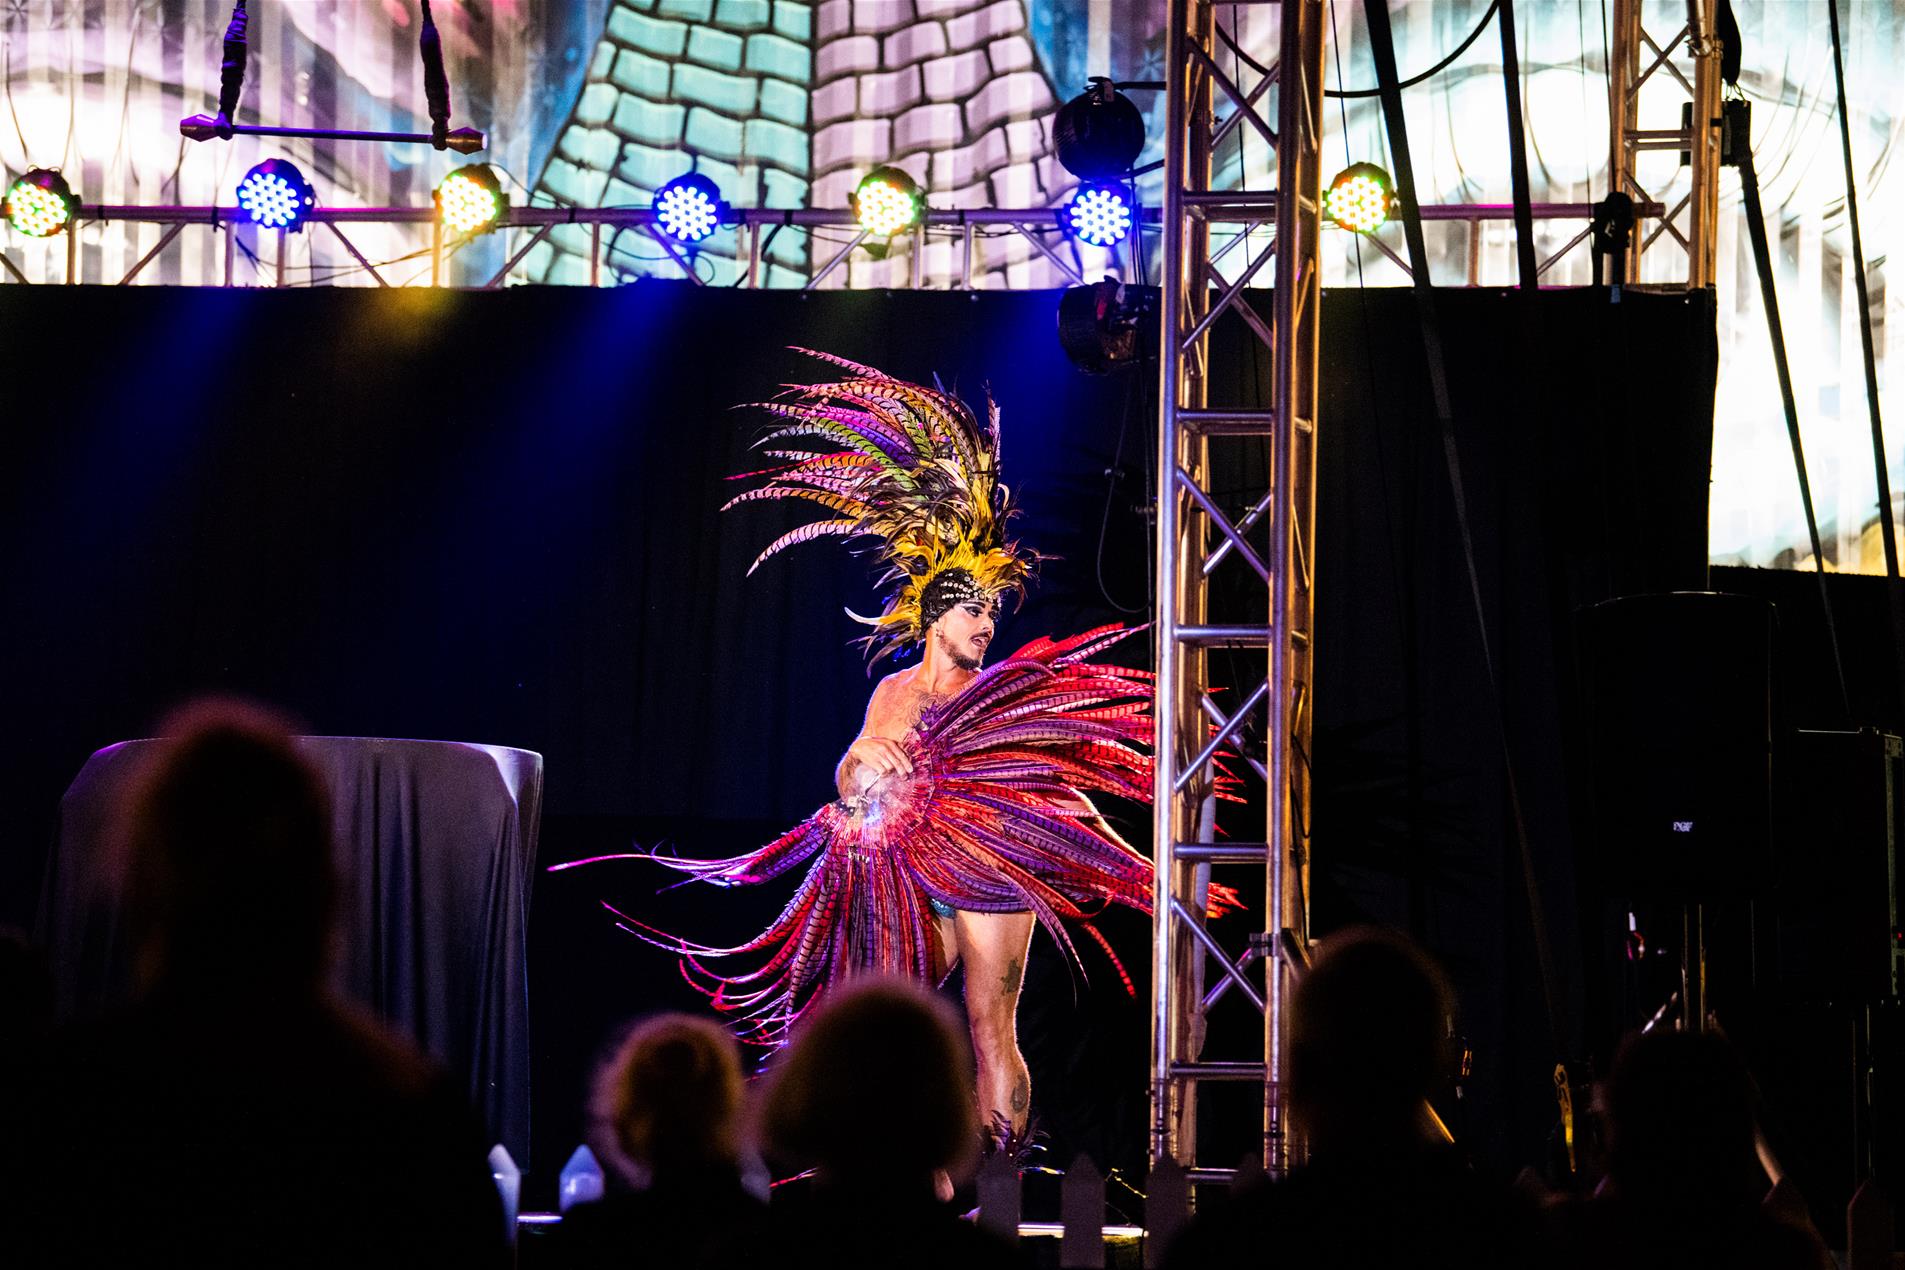 A performer wearing a colourful feather headpiece while holding colourful feather fans on stage.